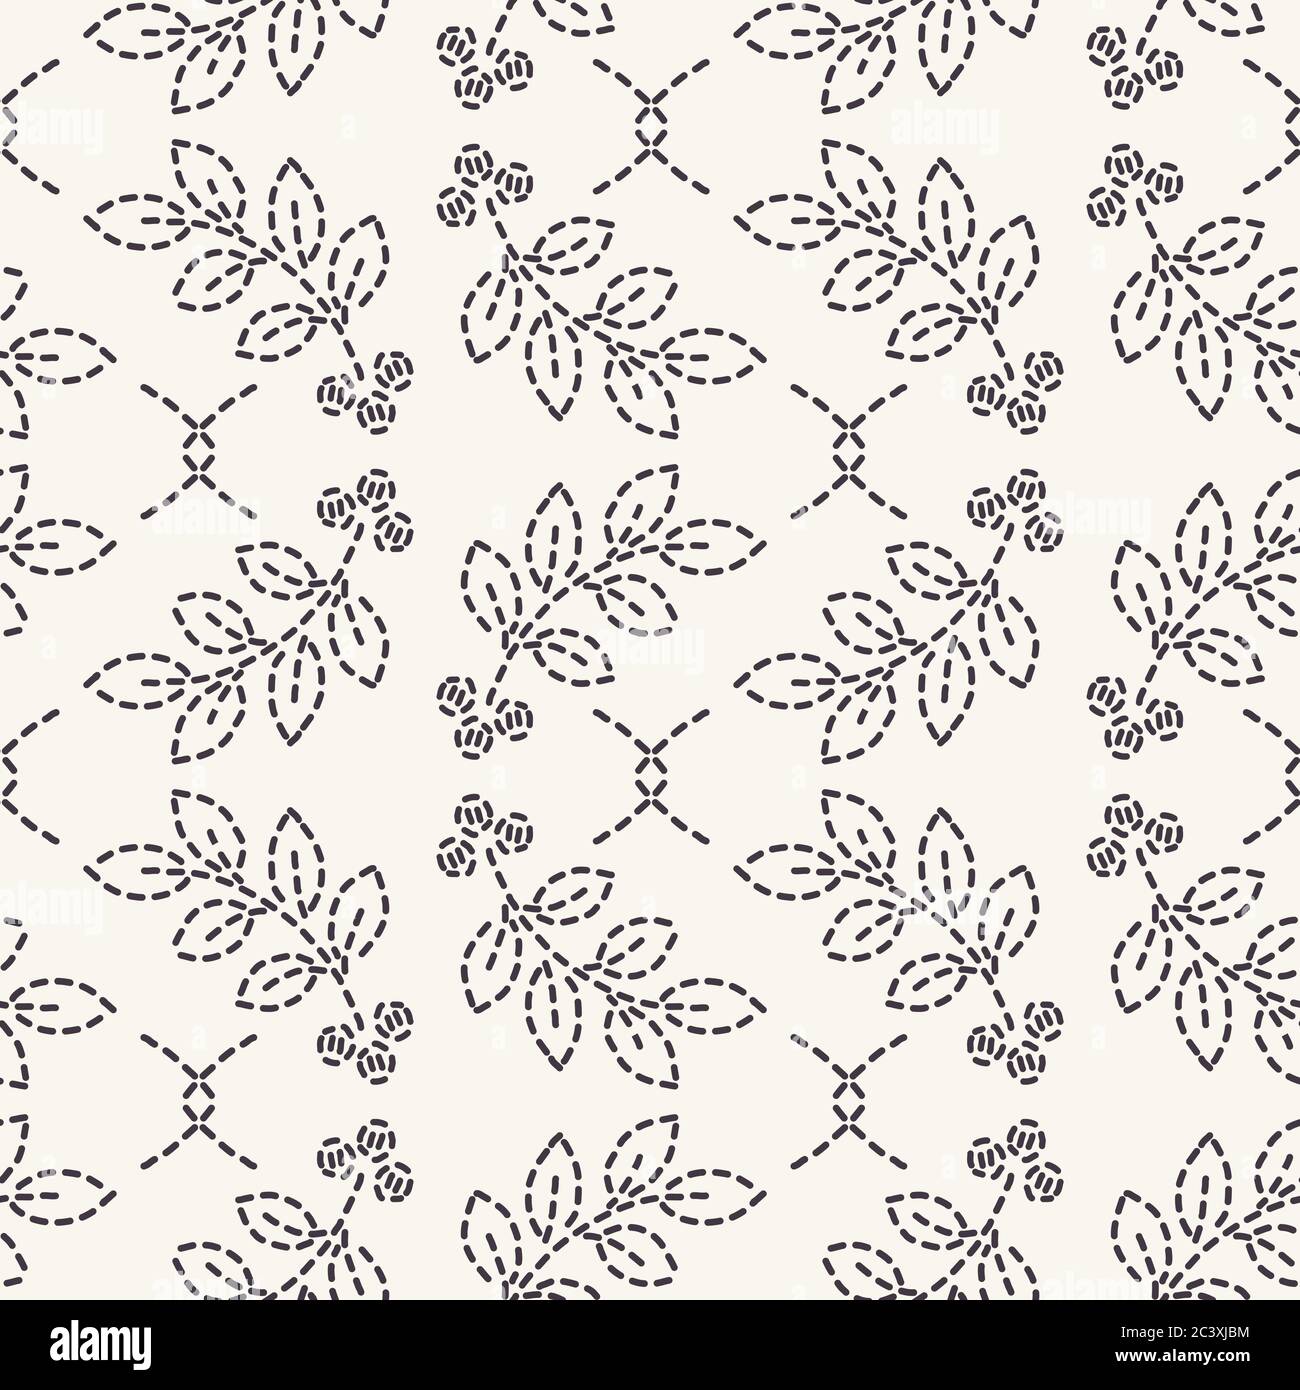 Leaf running stitch embroidery pattern. Simple needlework seamless vector background. Hand drawn geometric floral mosaic textile print. Ecru cream Stock Vector